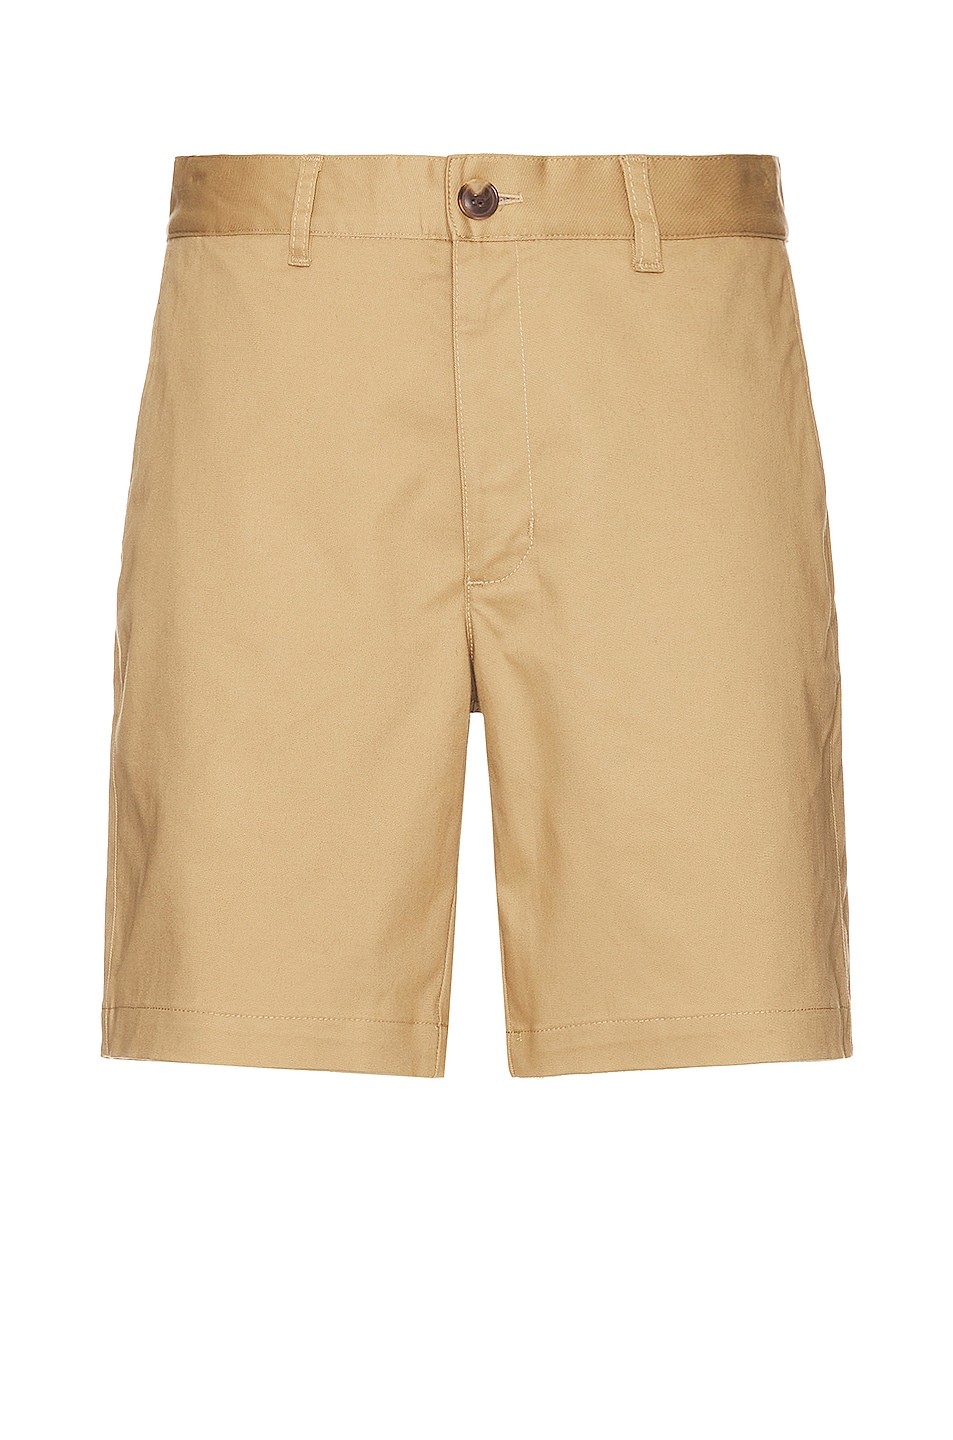 Image 1 of WAO The Chino Short in Tan